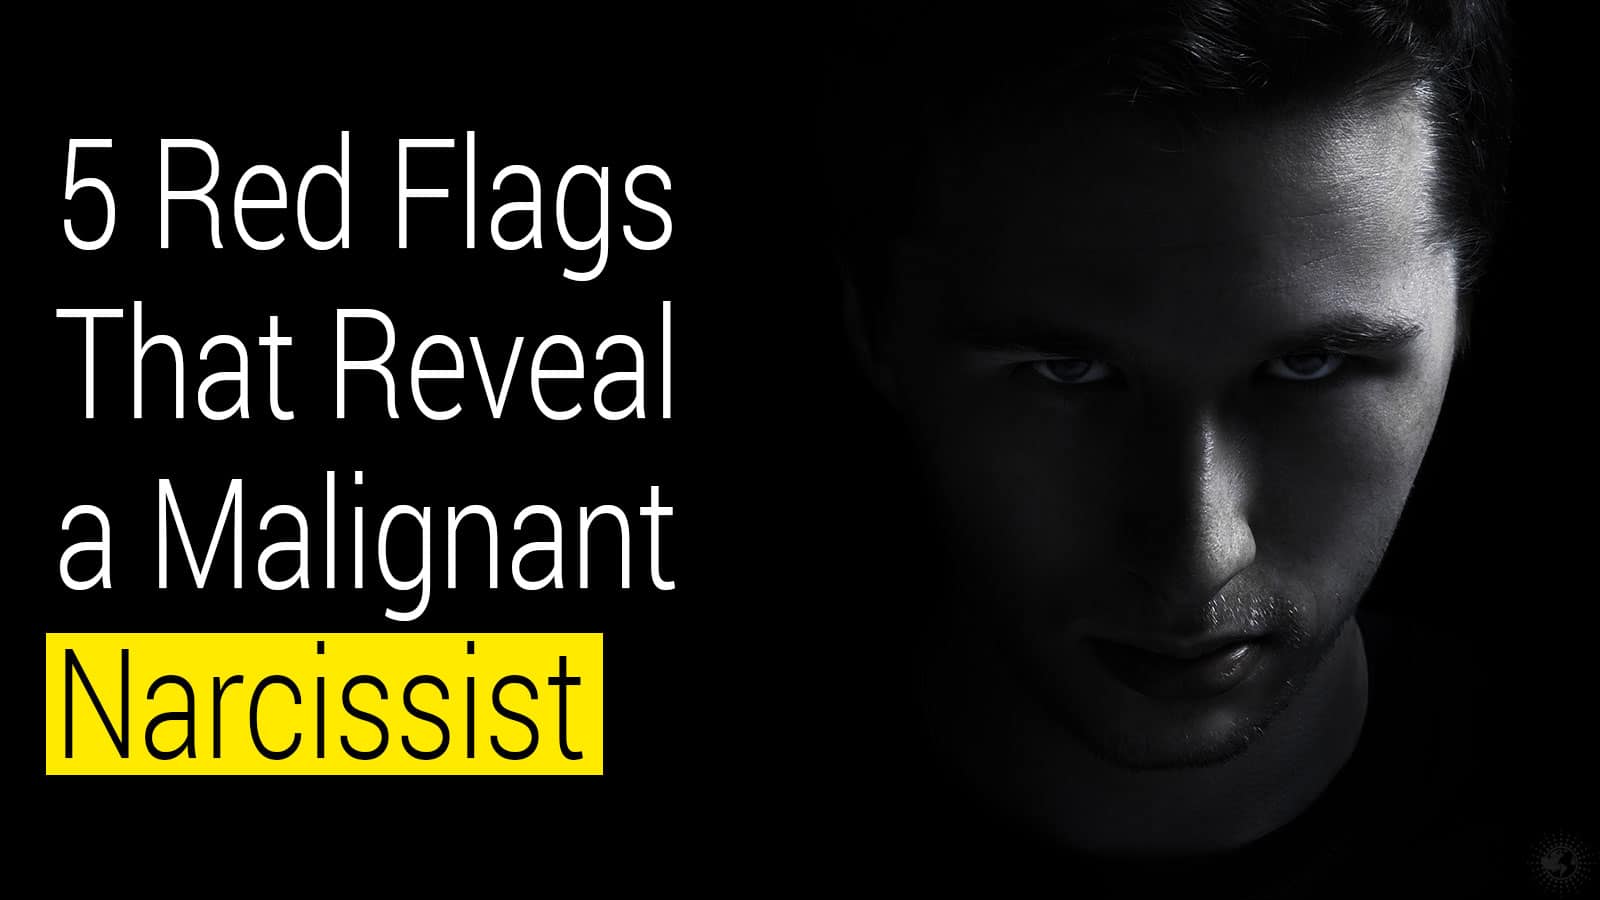 5 Red Flags That Reveal a Malignant Narcissist